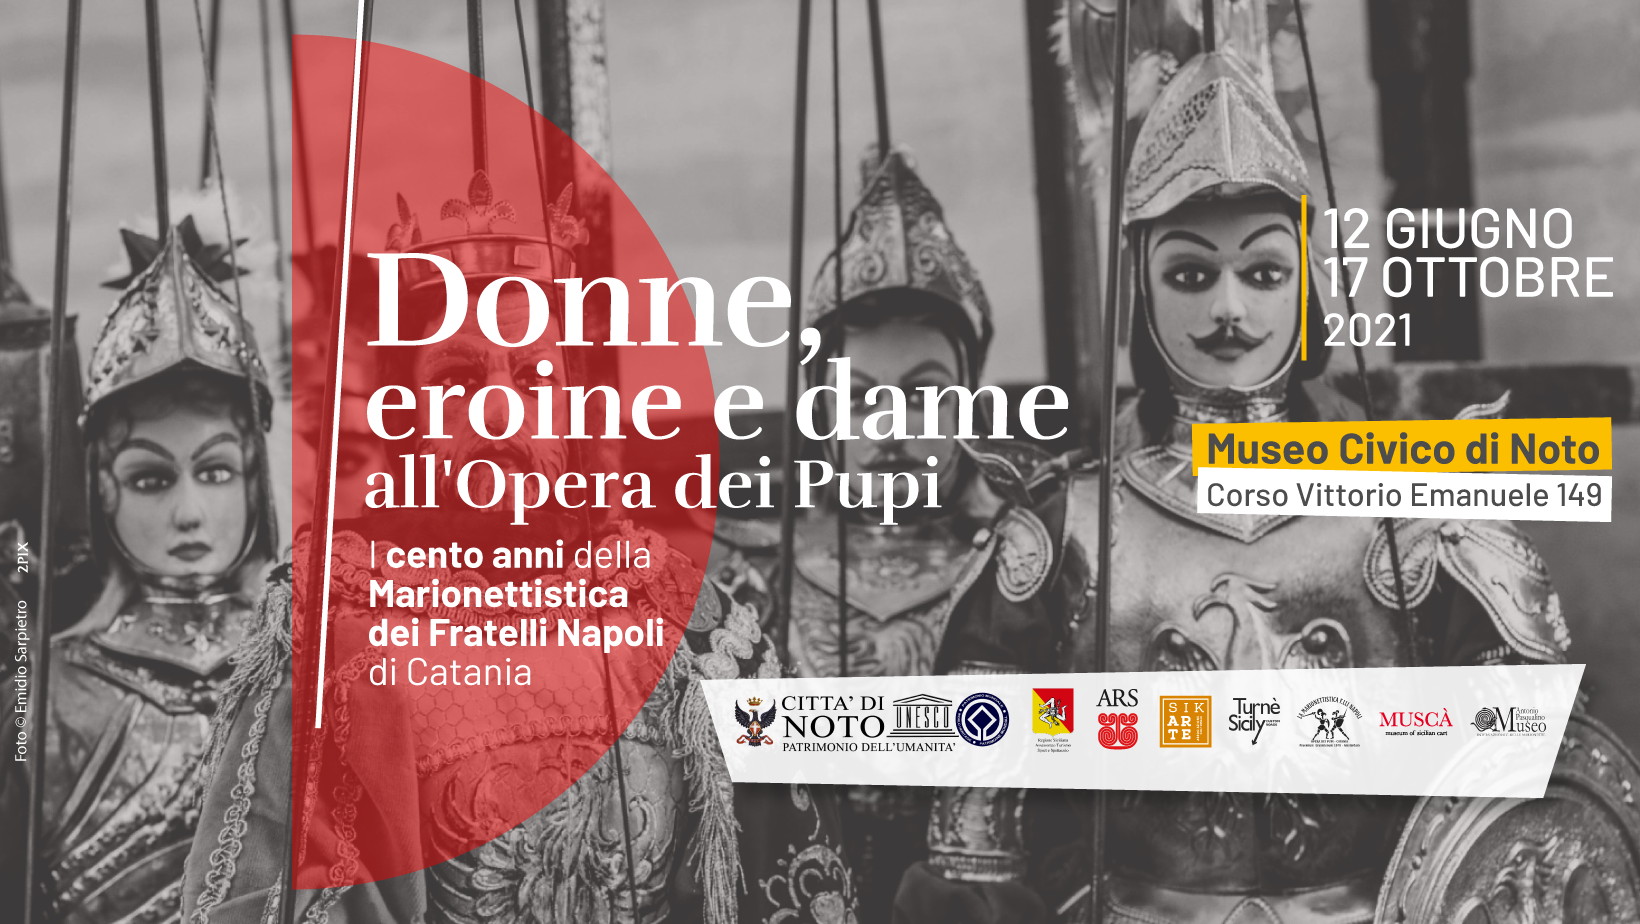 Opera dei pupi: the hundred years of the Marionettistica Fratelli ...